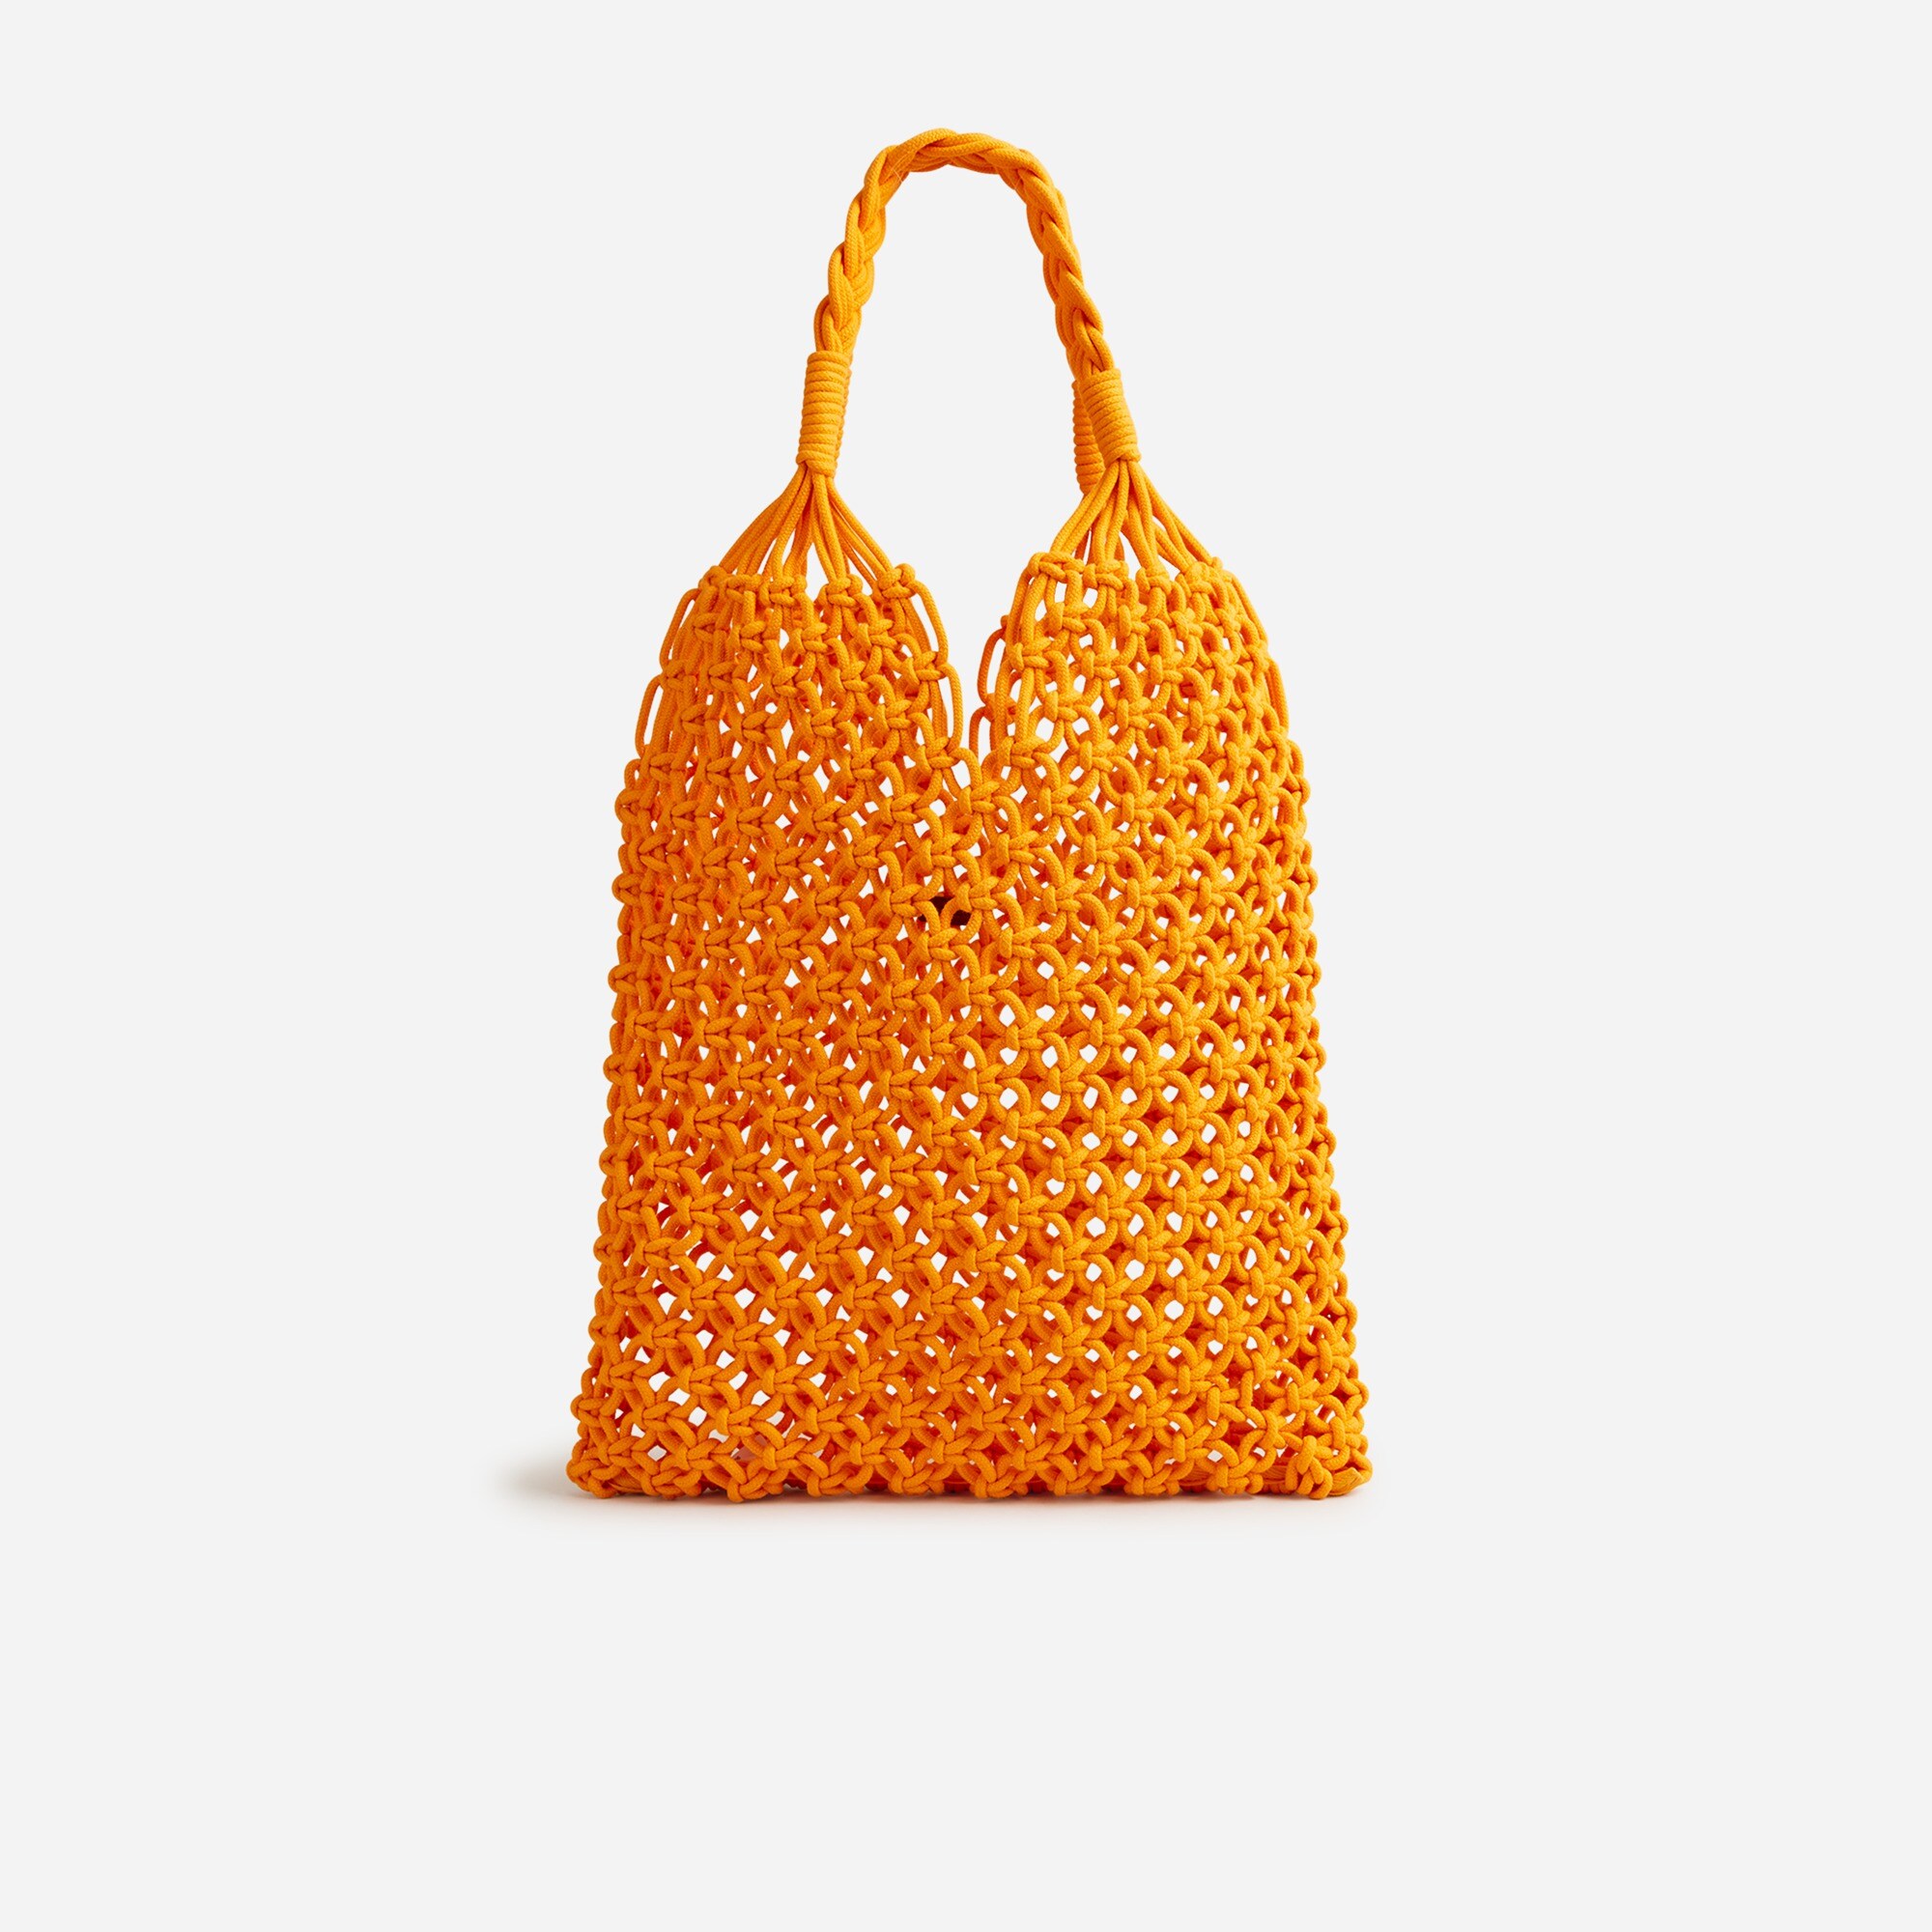  Cadiz hand-knotted rope tote